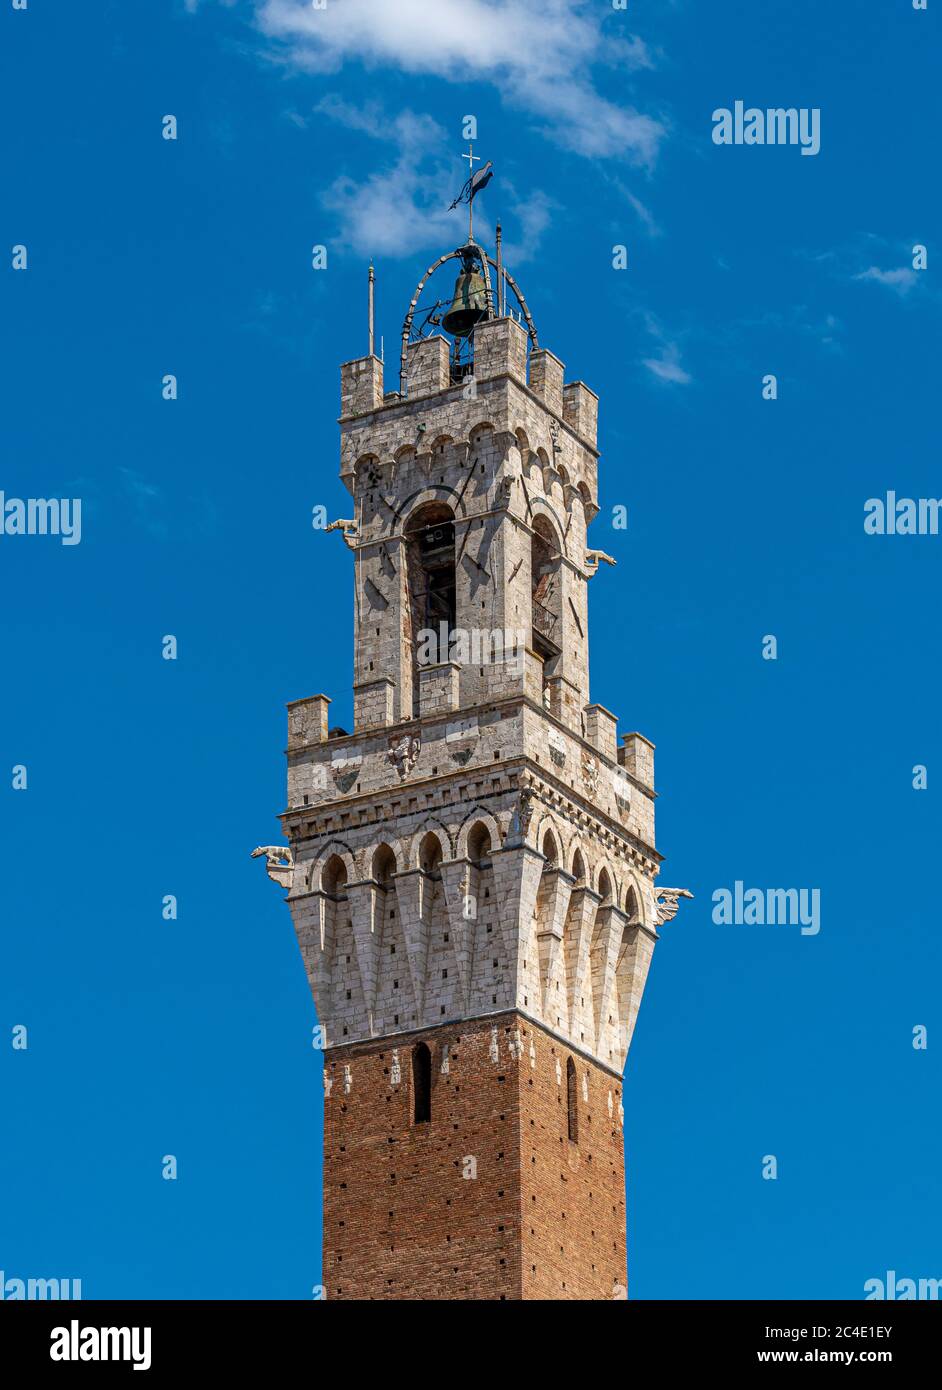 The top section of Torre del Mangia in Piazza del Campo, Siena. Italy Stock Photo